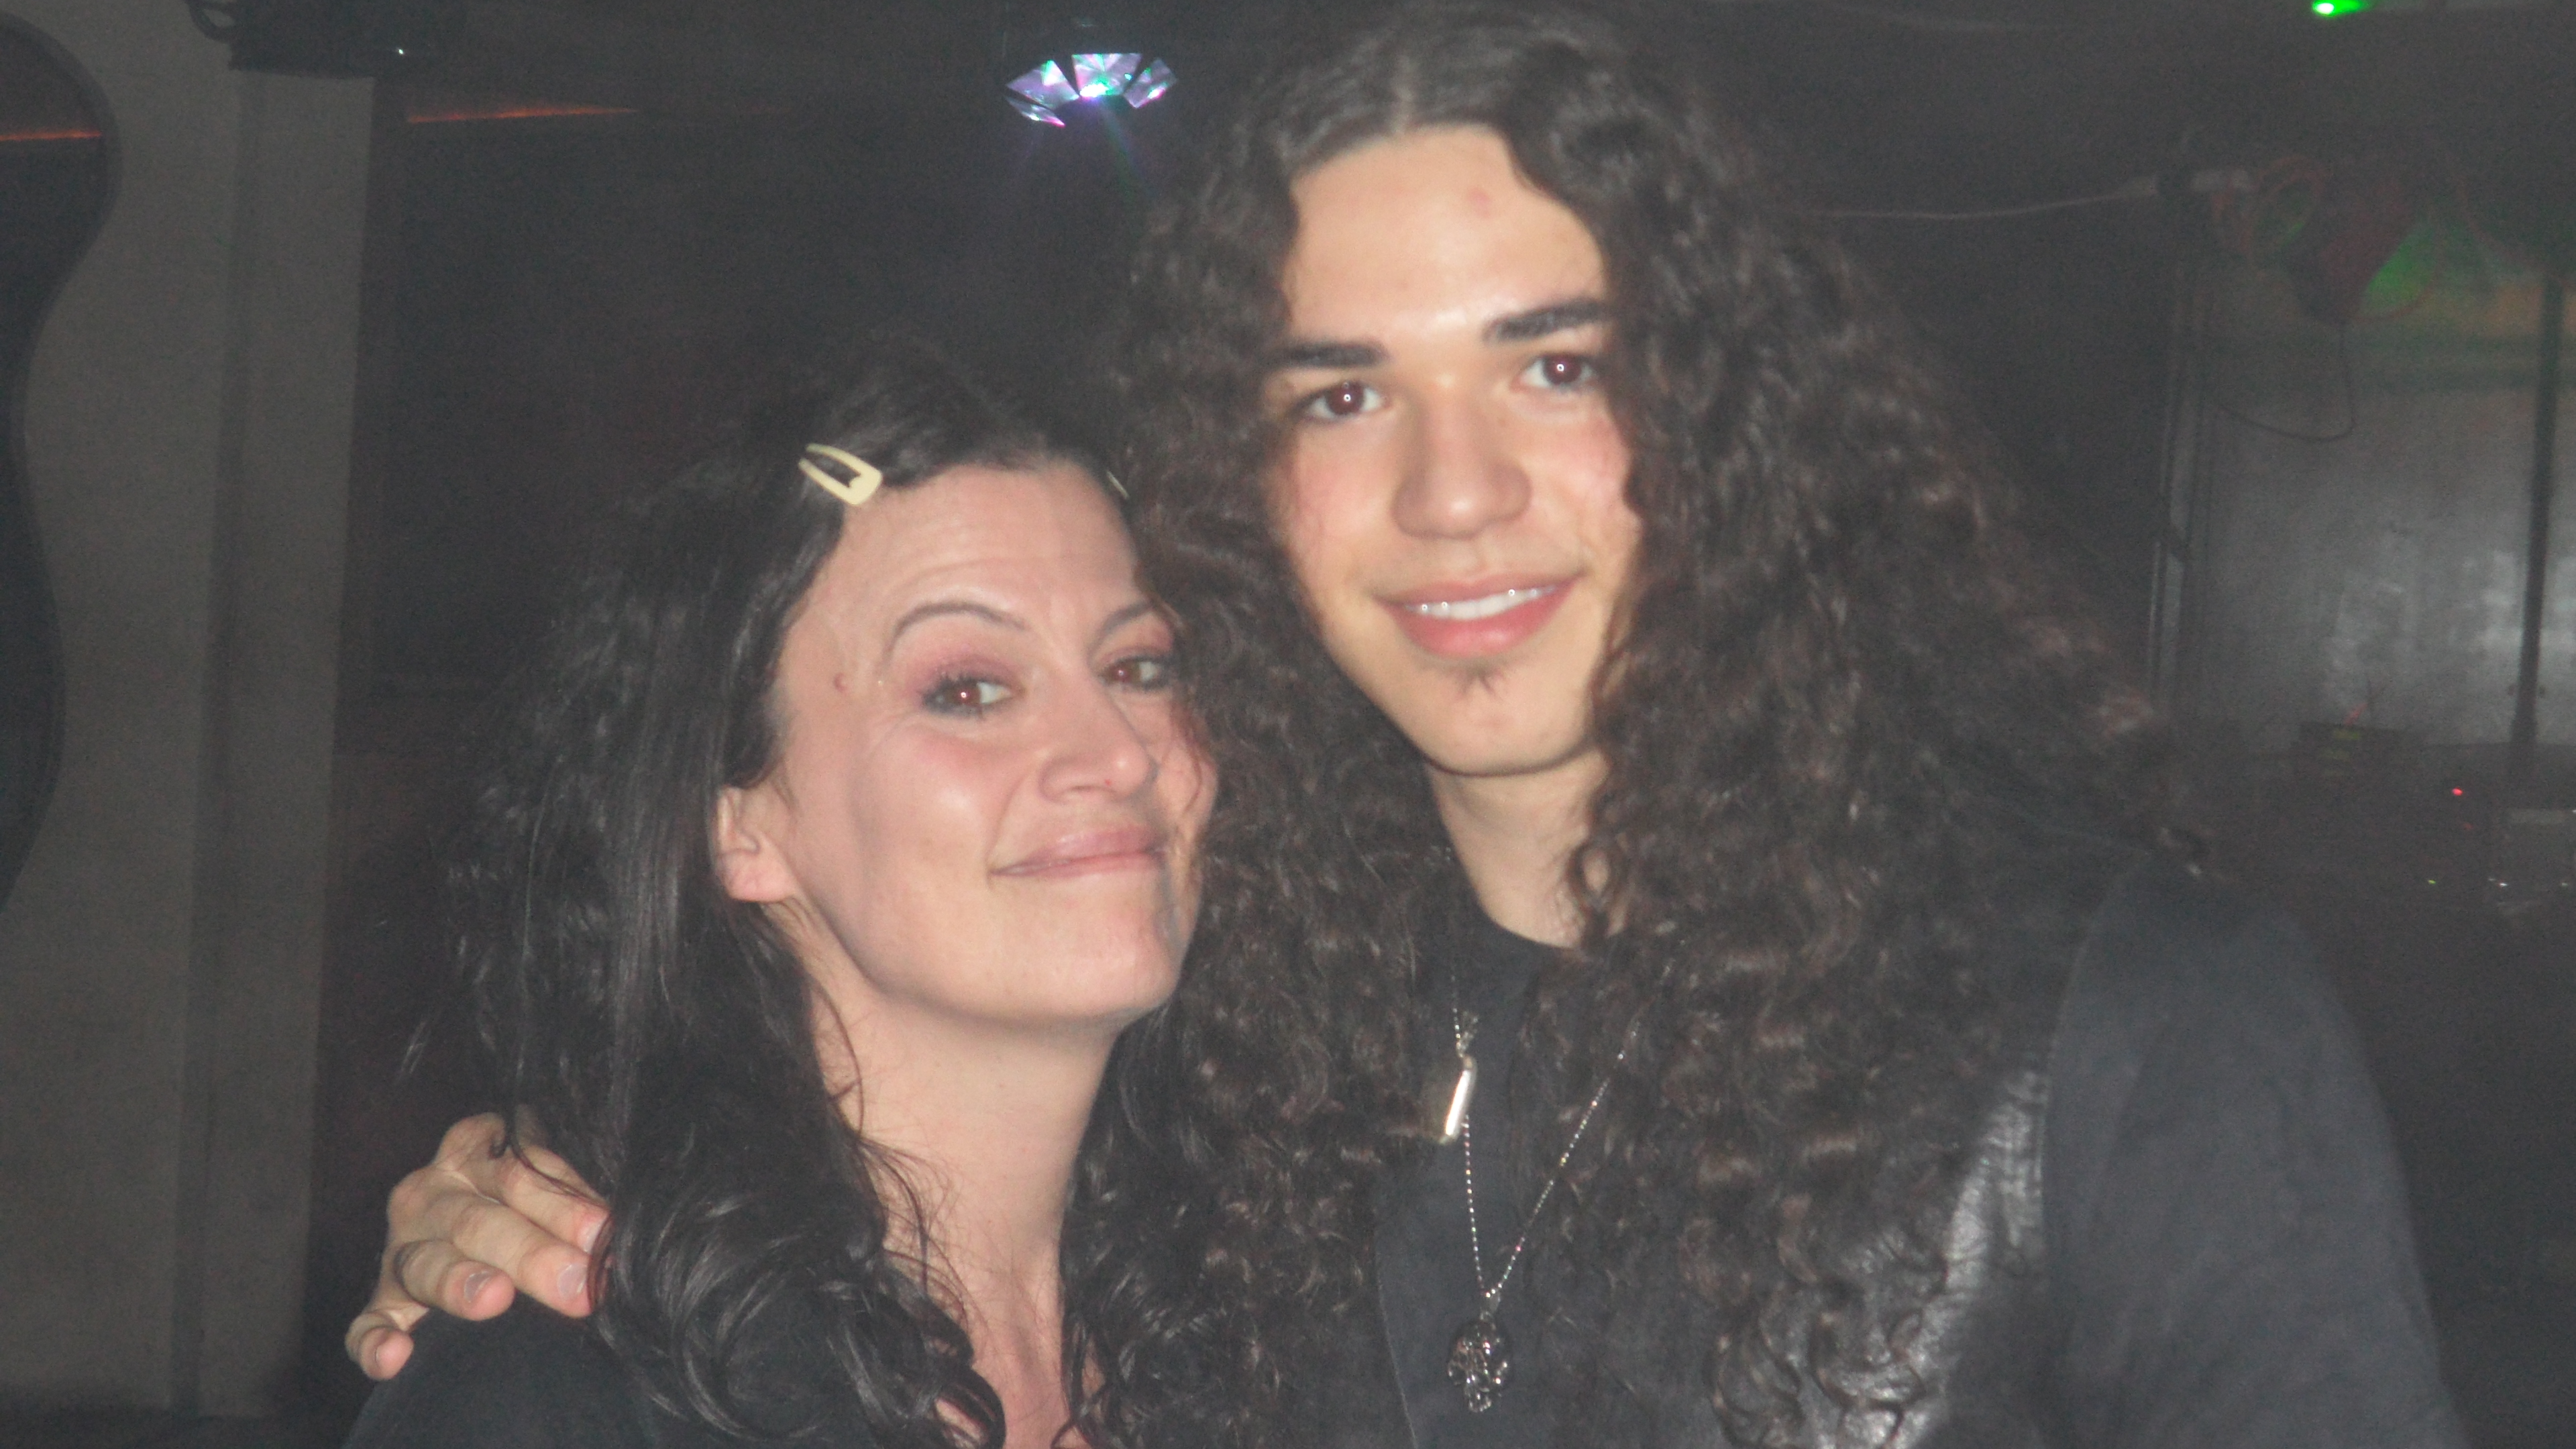 Tribute to Mike Starr (bass player-Alice in Chains)concert, April 4 2011, Beverly Hills. Ronnie Connell-drums (who bares incredible resemblance to Mike Starr) and sister of Mike Starr, Melinda.